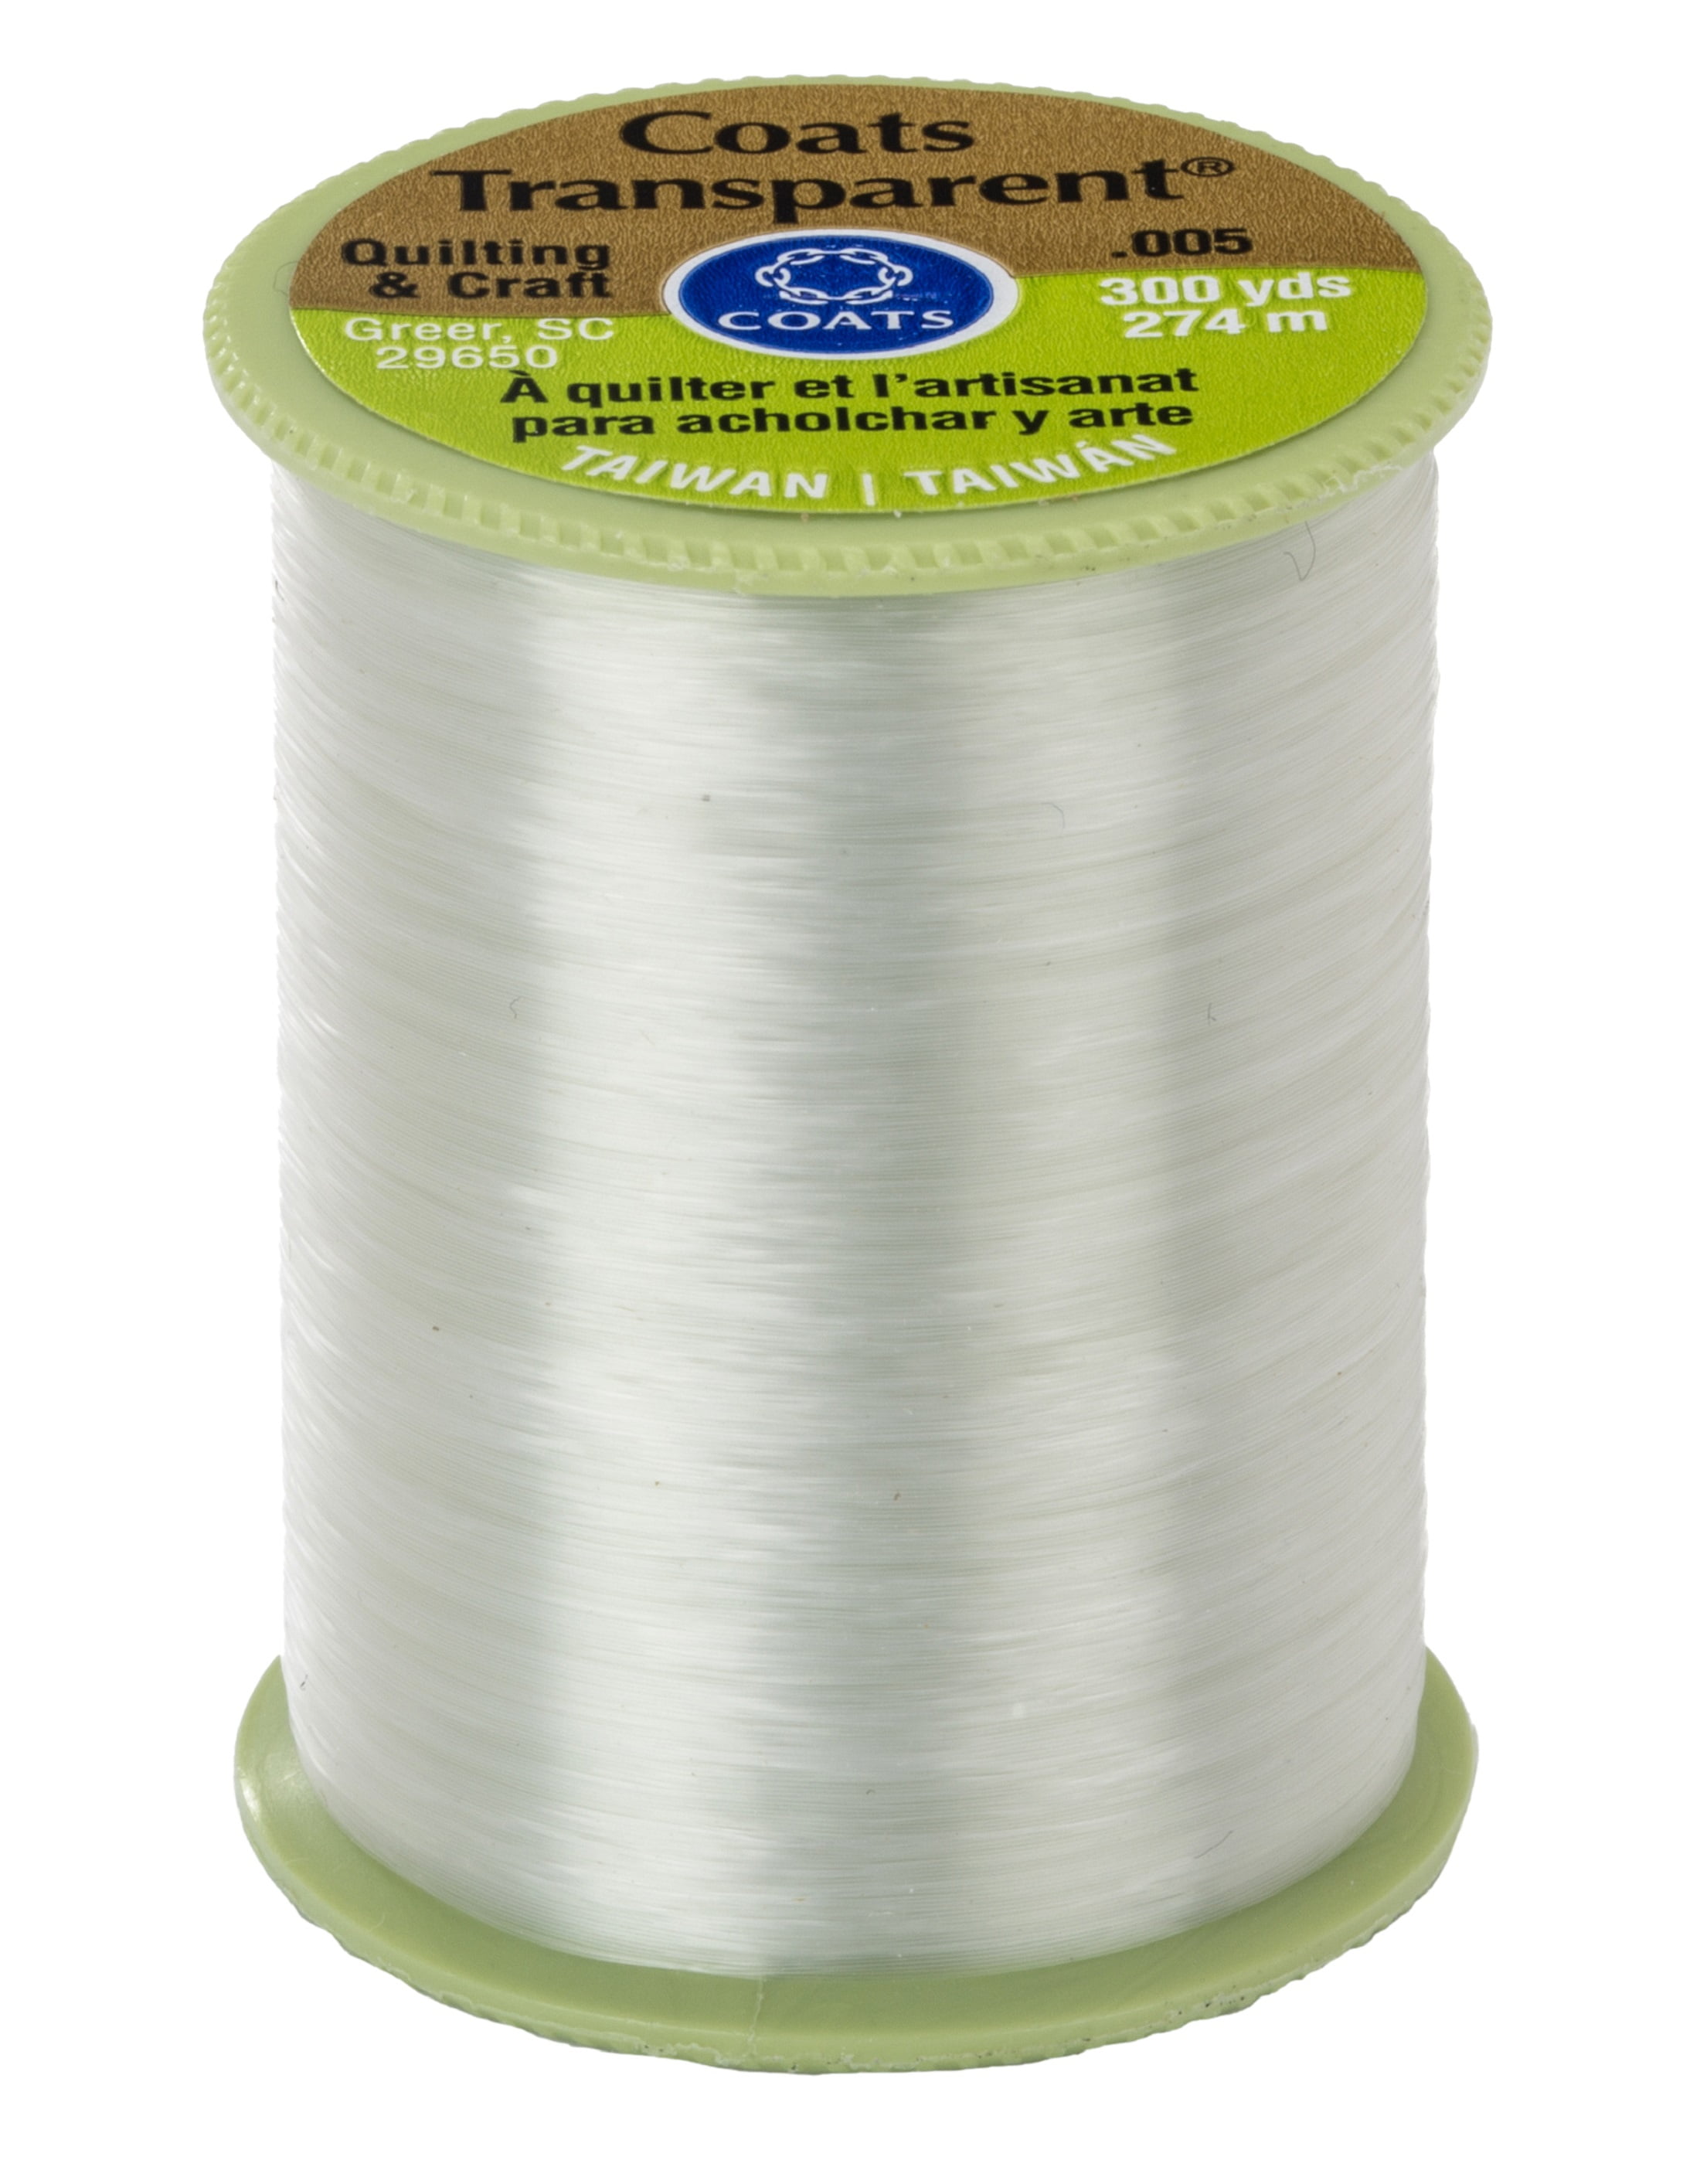 PACK OF 3 - Invisible Nylon Sewing Thread, CLEAR Total 660 YARDS FREE  SHIPPING